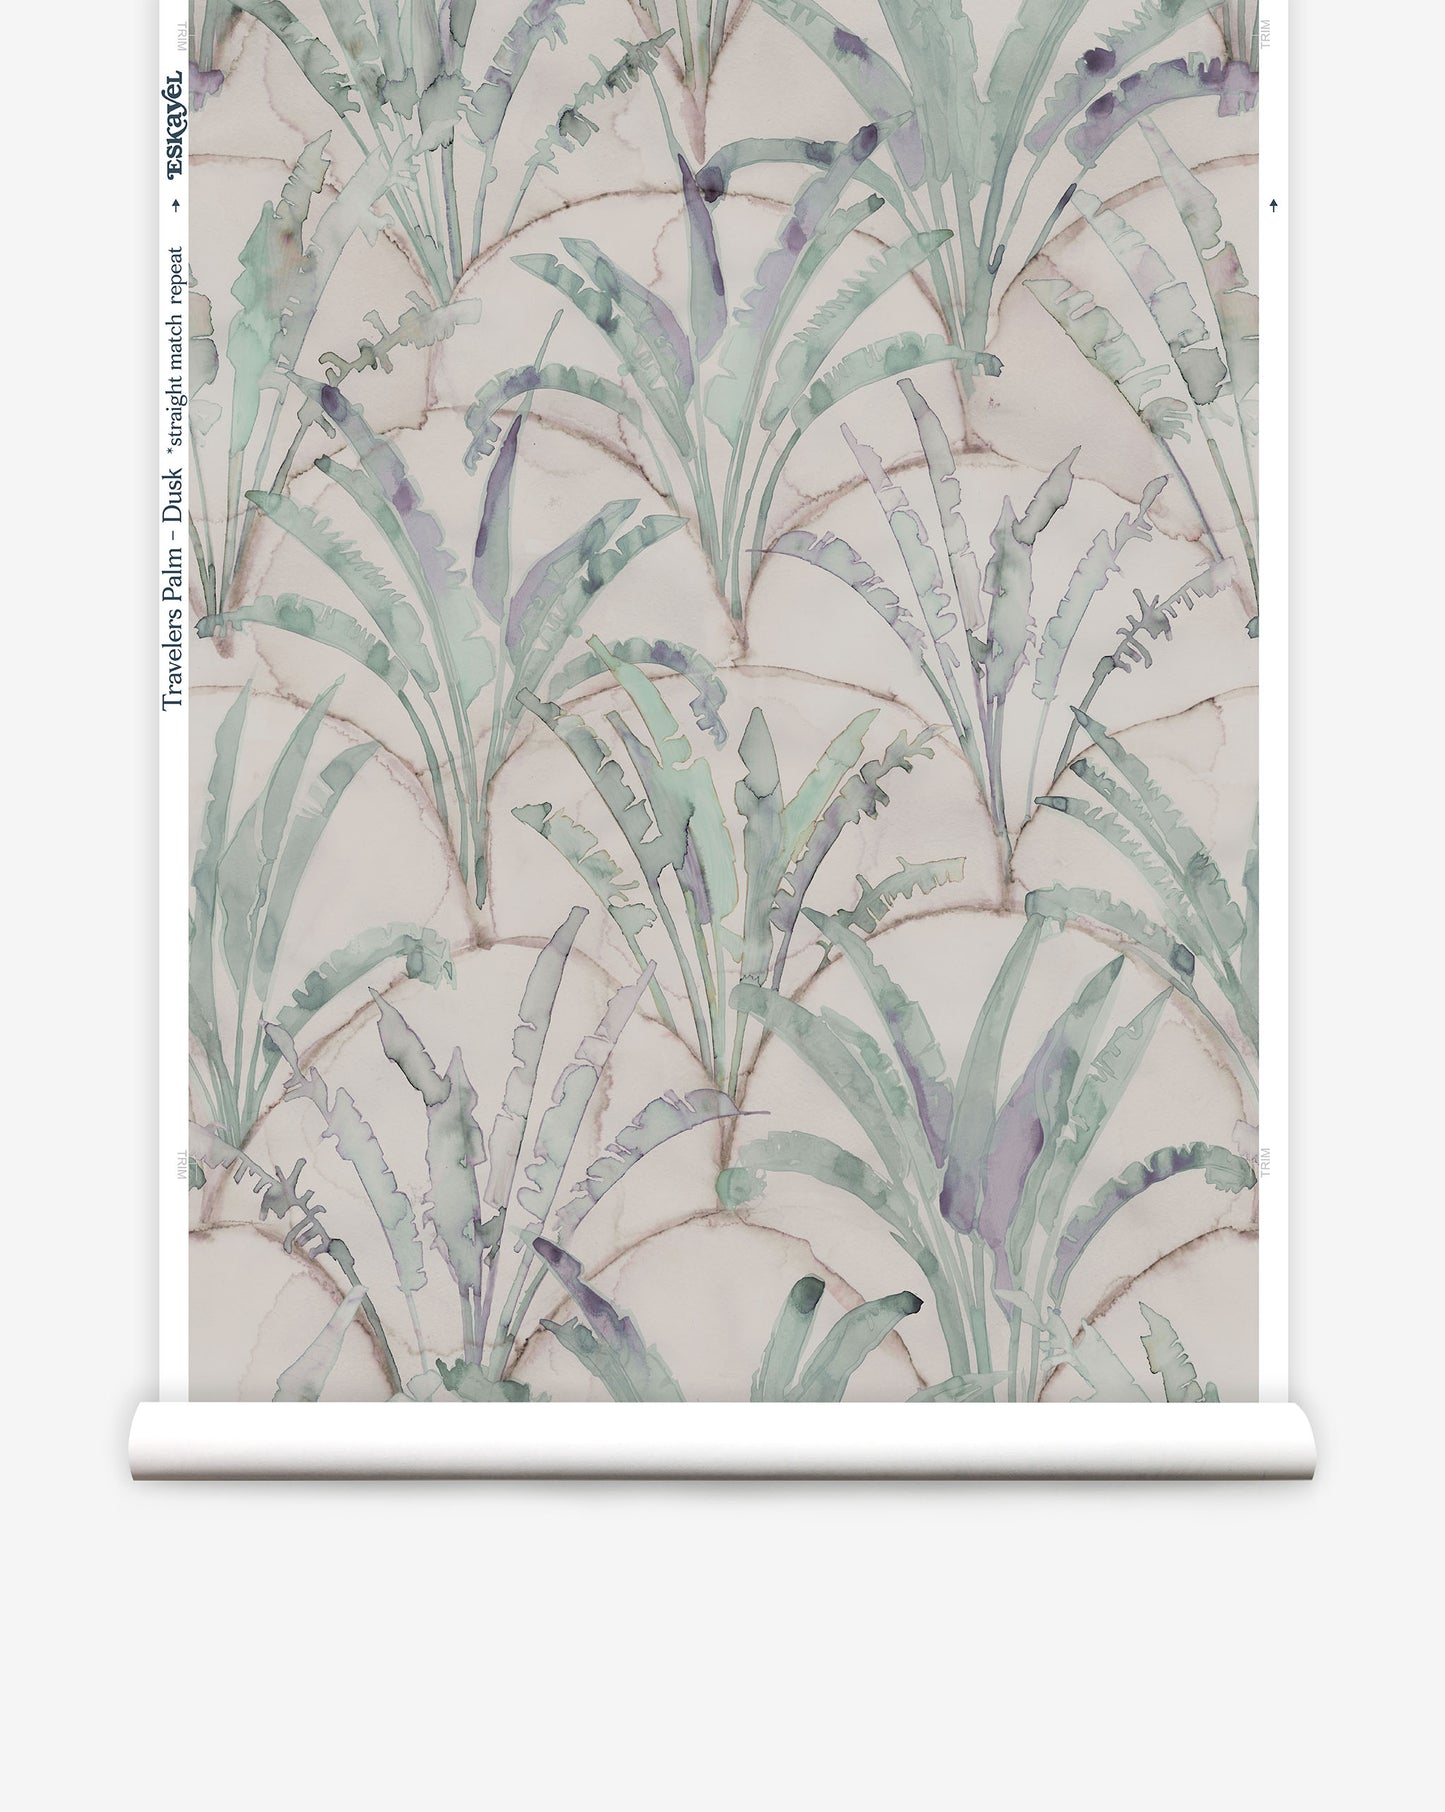 Travelers Palm presents repeating trees against a background of overlapping scallops. The Dusk colorway is mainly green and beige.